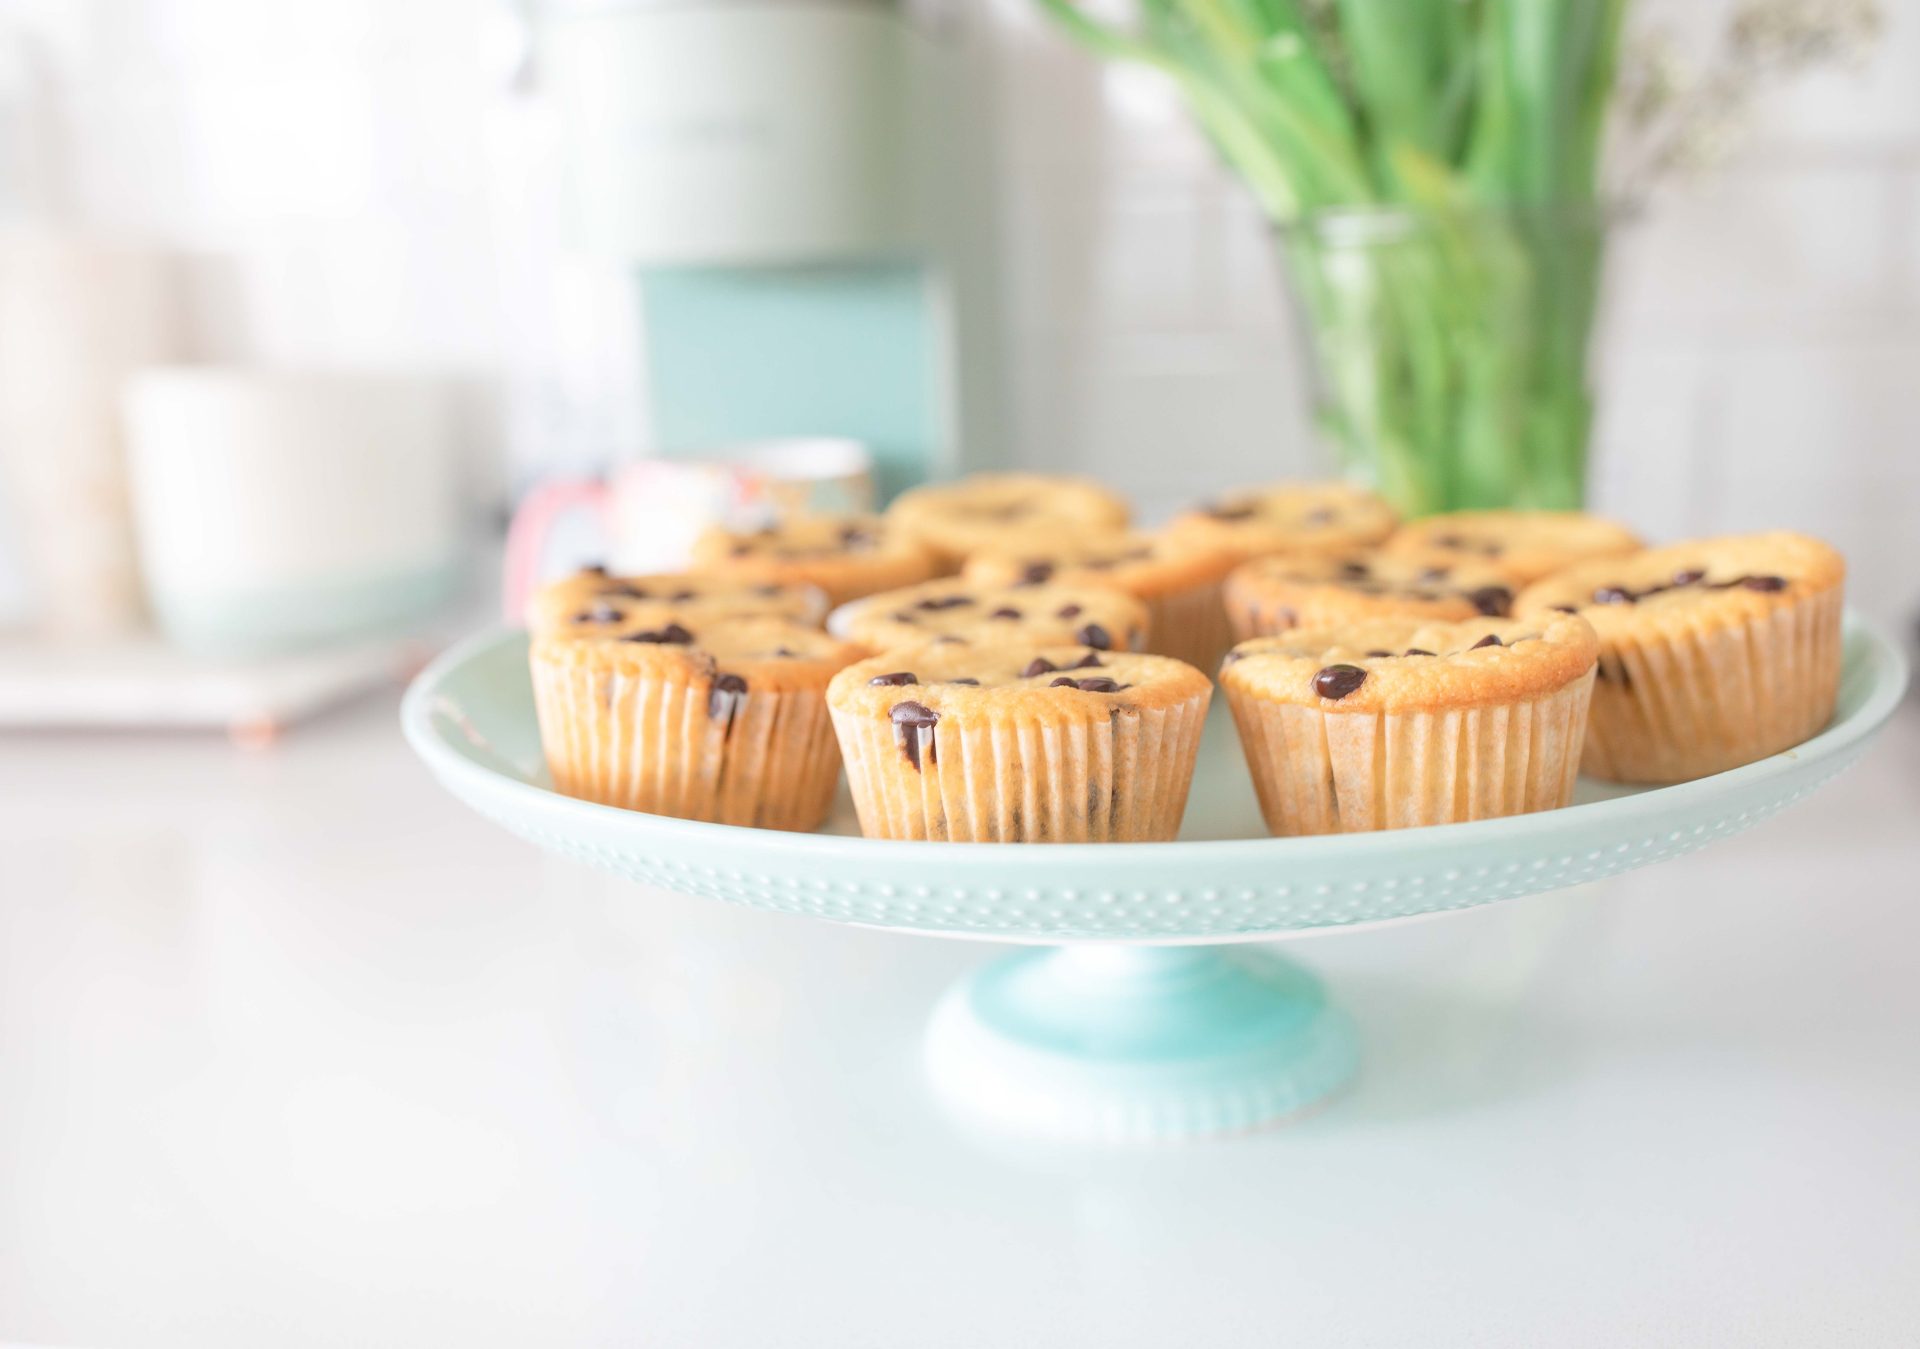 low carb chocolate chip muffins, sugar free chocolate chip muffins, muffins made with almond flour, lily's chocolate, coffee, breakfast, low carb recipe, keto muffins, low carb and low sugar recipes, healthy food, diabetic friendly, no sugar added, healthy muffins